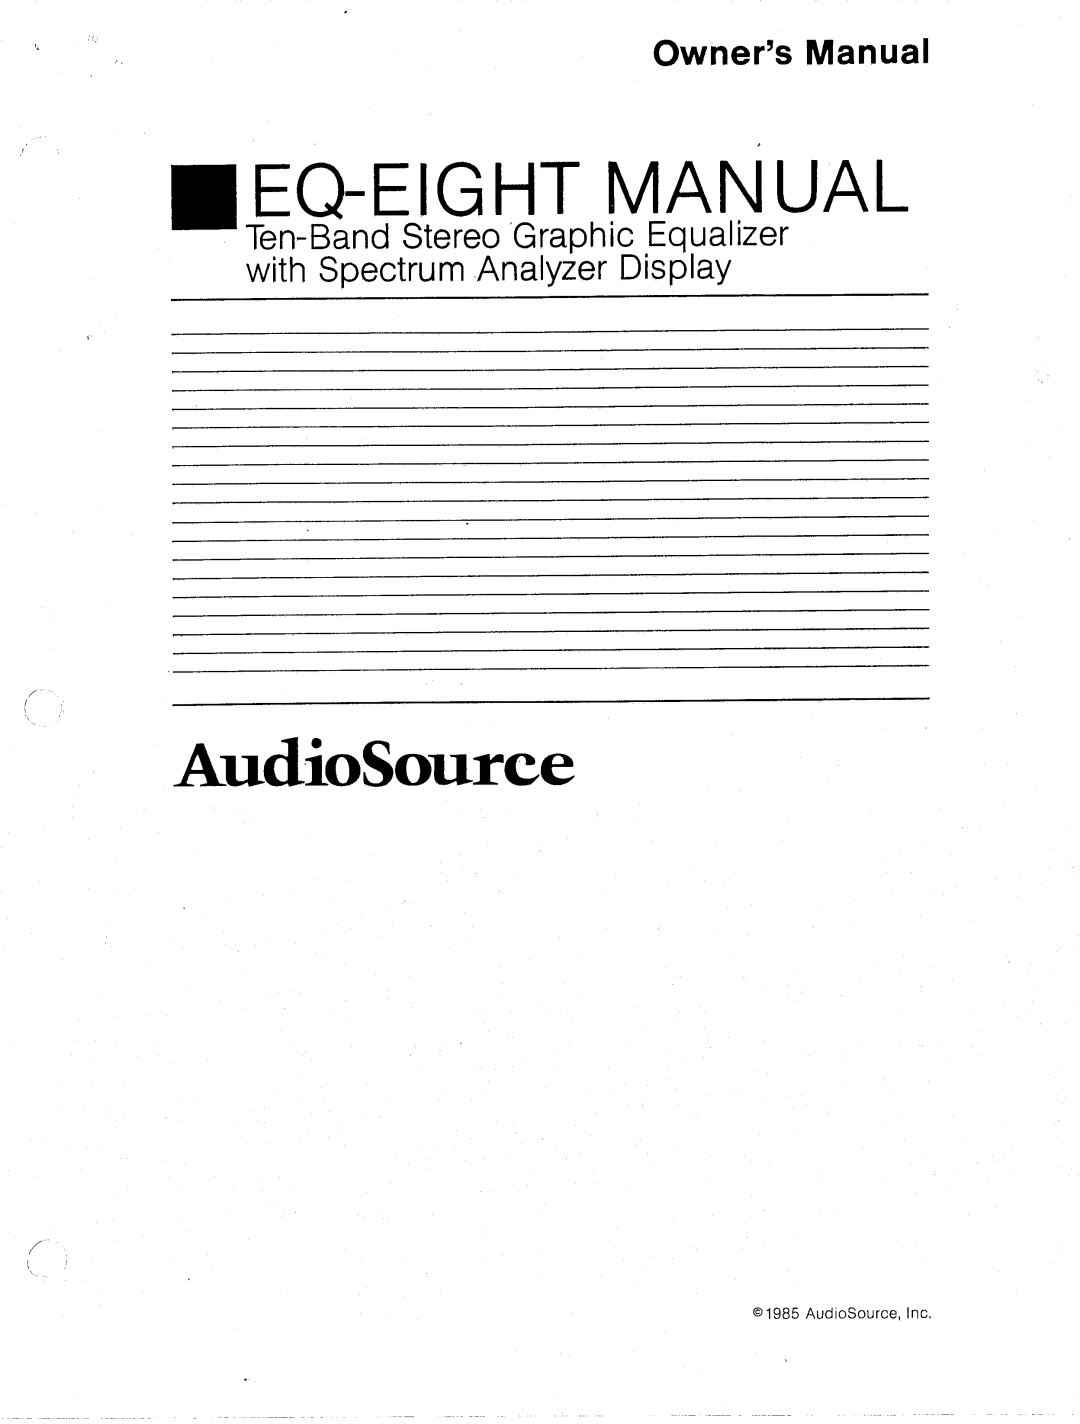 AudioSource user manual The AudioSource EQ 200 as a Pre-Amplifier, Rear View, Audio In, Video In, TAPE 2 IN, TAPE 1 IN 